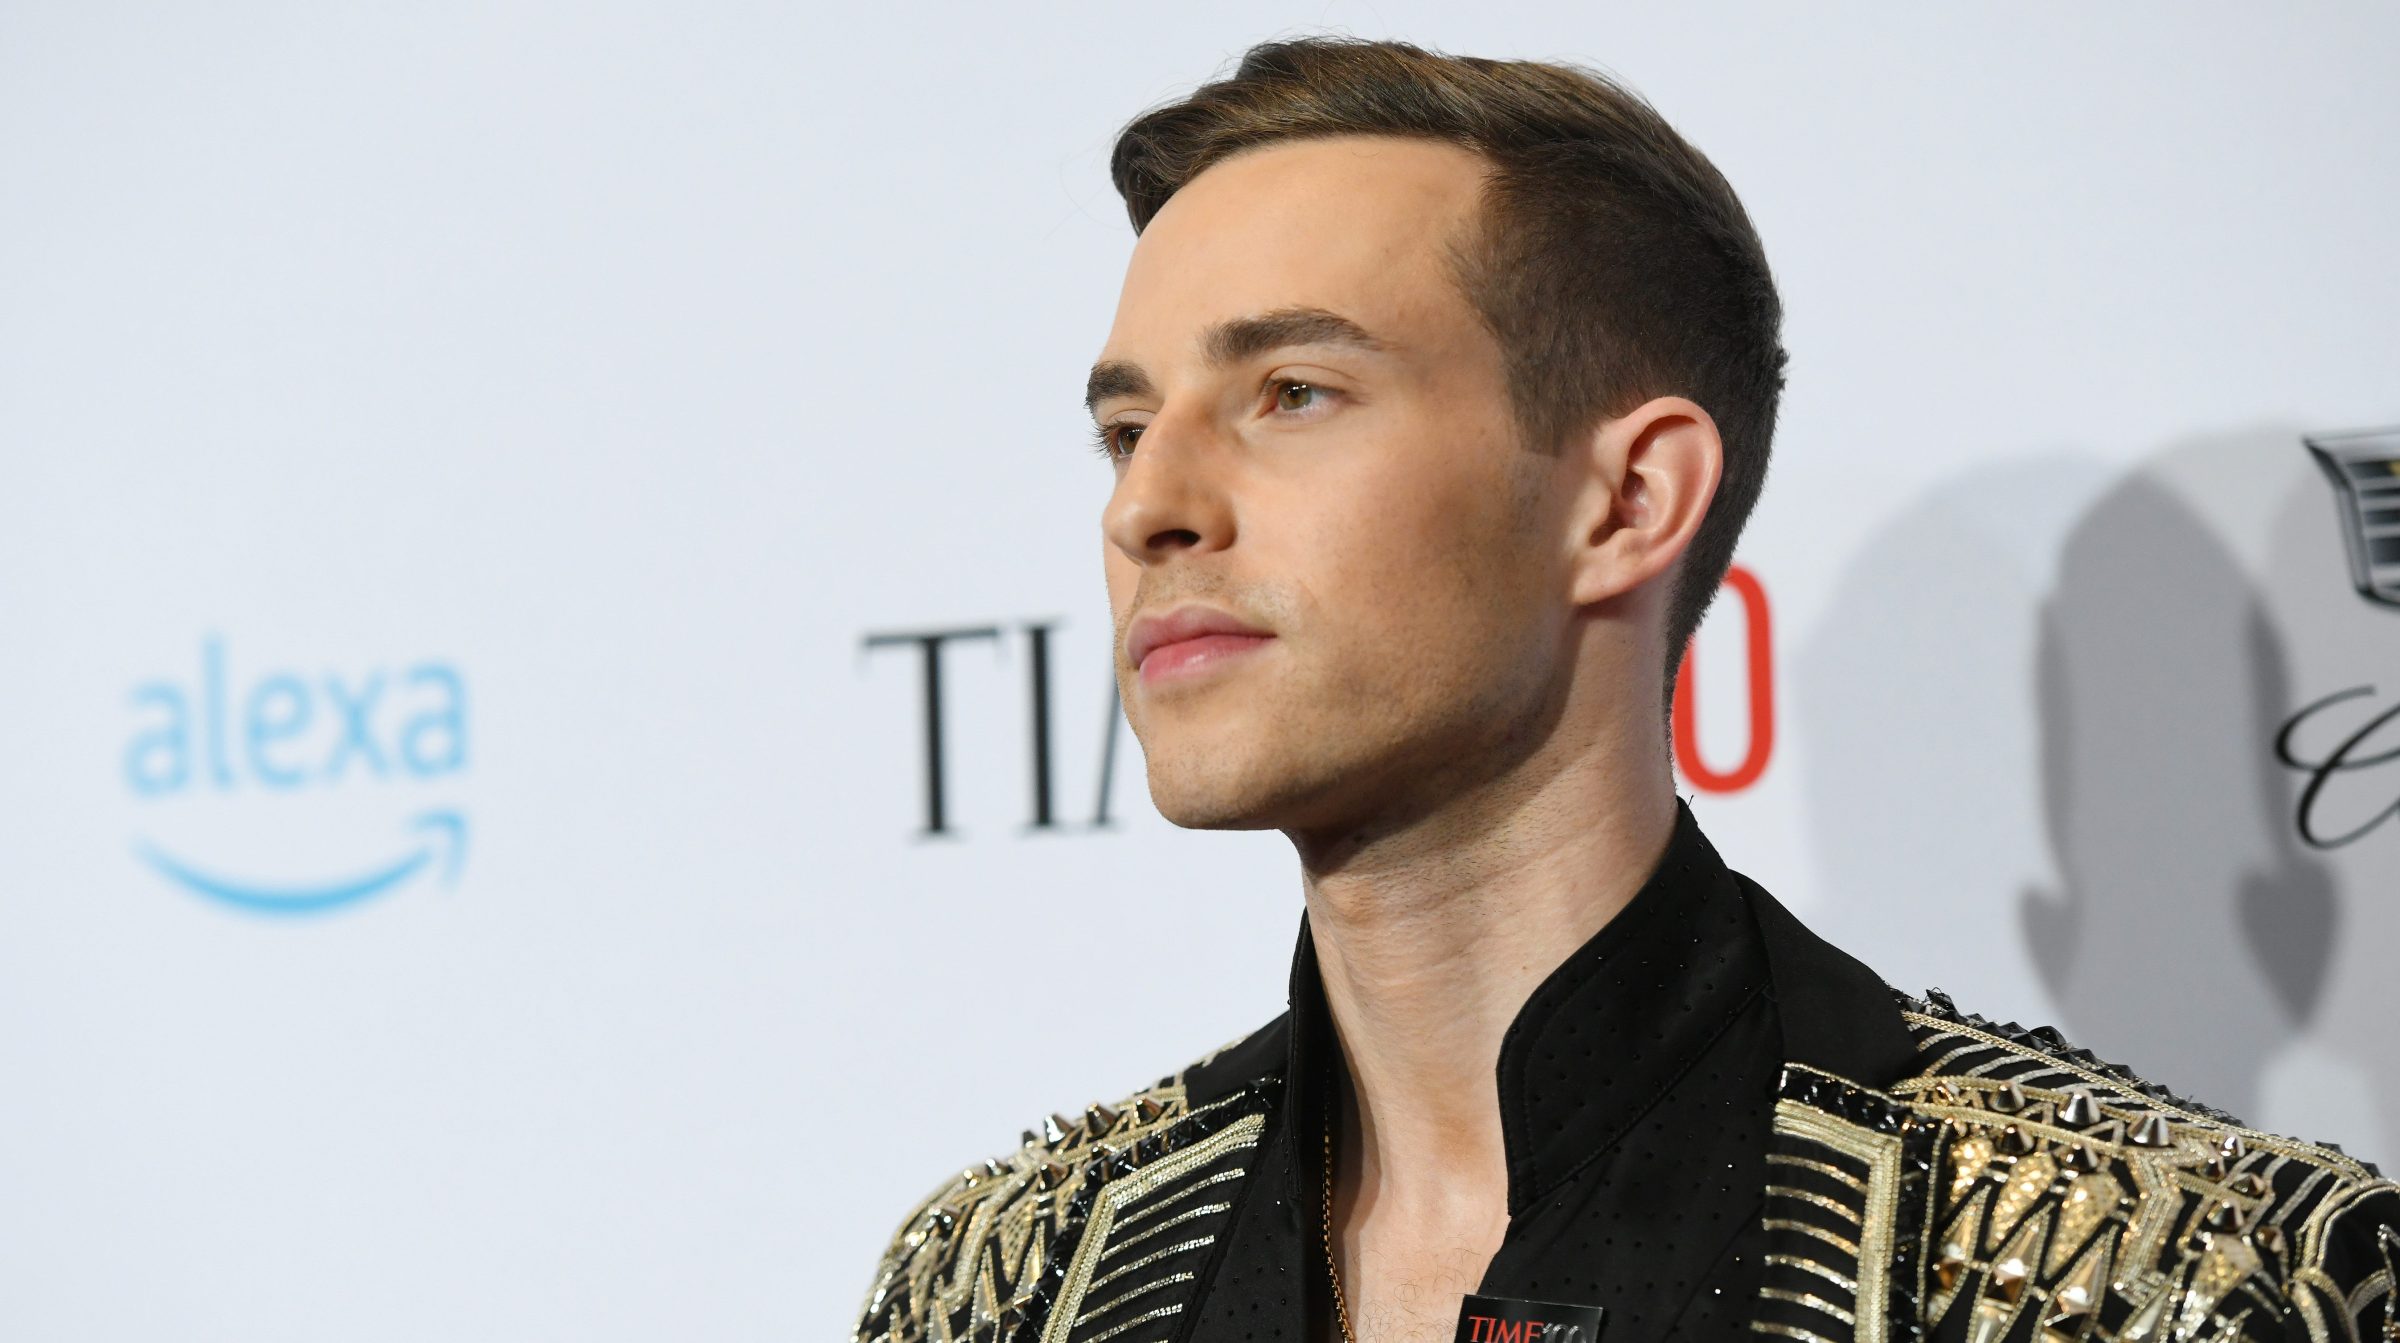 Adam Rippon attends the TIME 100 Gala 2019 Lobby Arrivals at Jazz at Lincoln Center on April 23, 2019 in New York City.